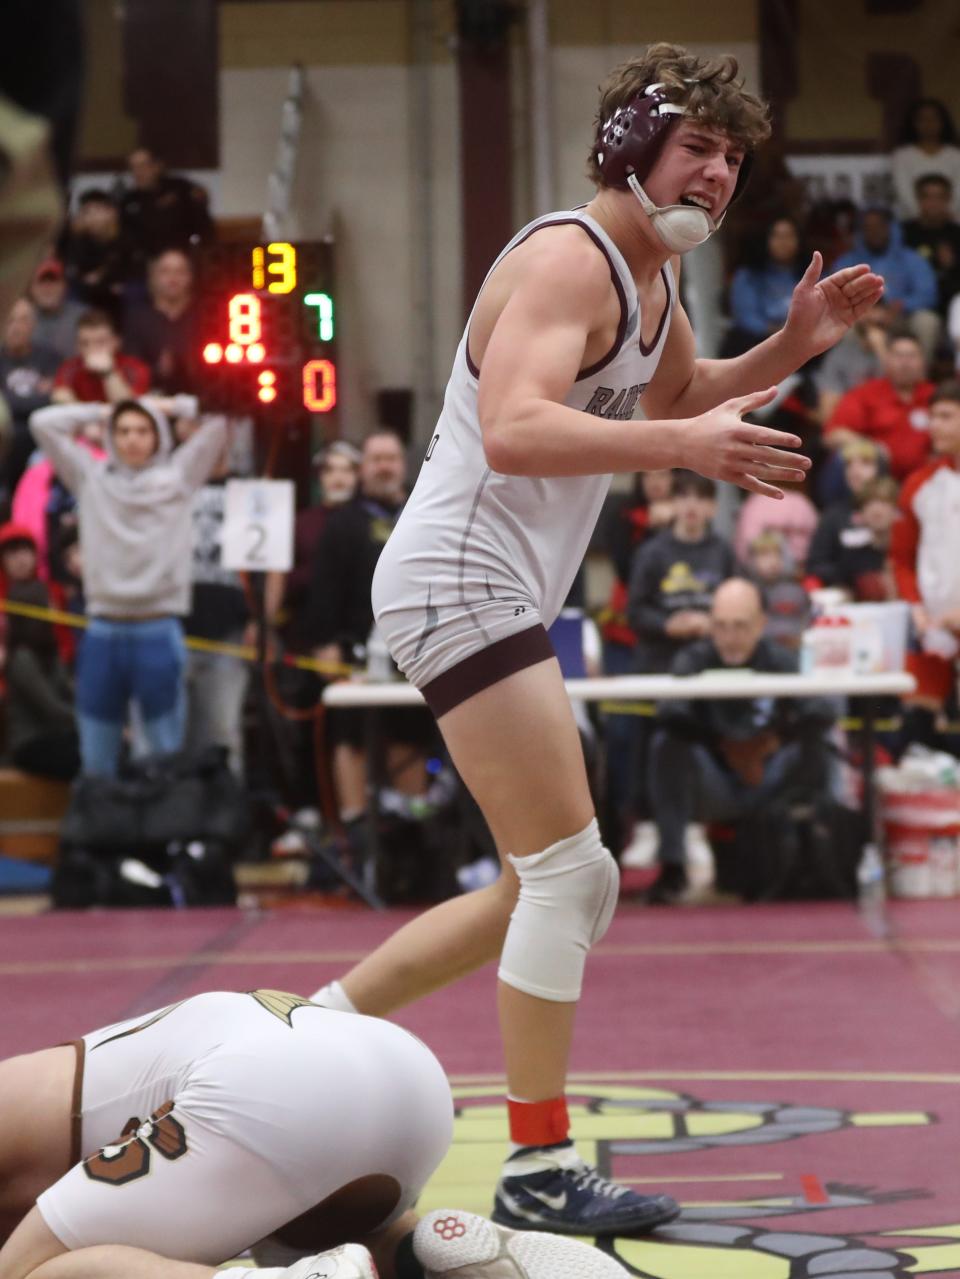 Thomas Iasiello of Scarsdale defeated Gregory Casvikes of Clarkstown South in the 138 pound championship during the Section 1 Division 1 Wrestling Championships at Arlington High School in Lagrangeville Feb. 12, 2023.